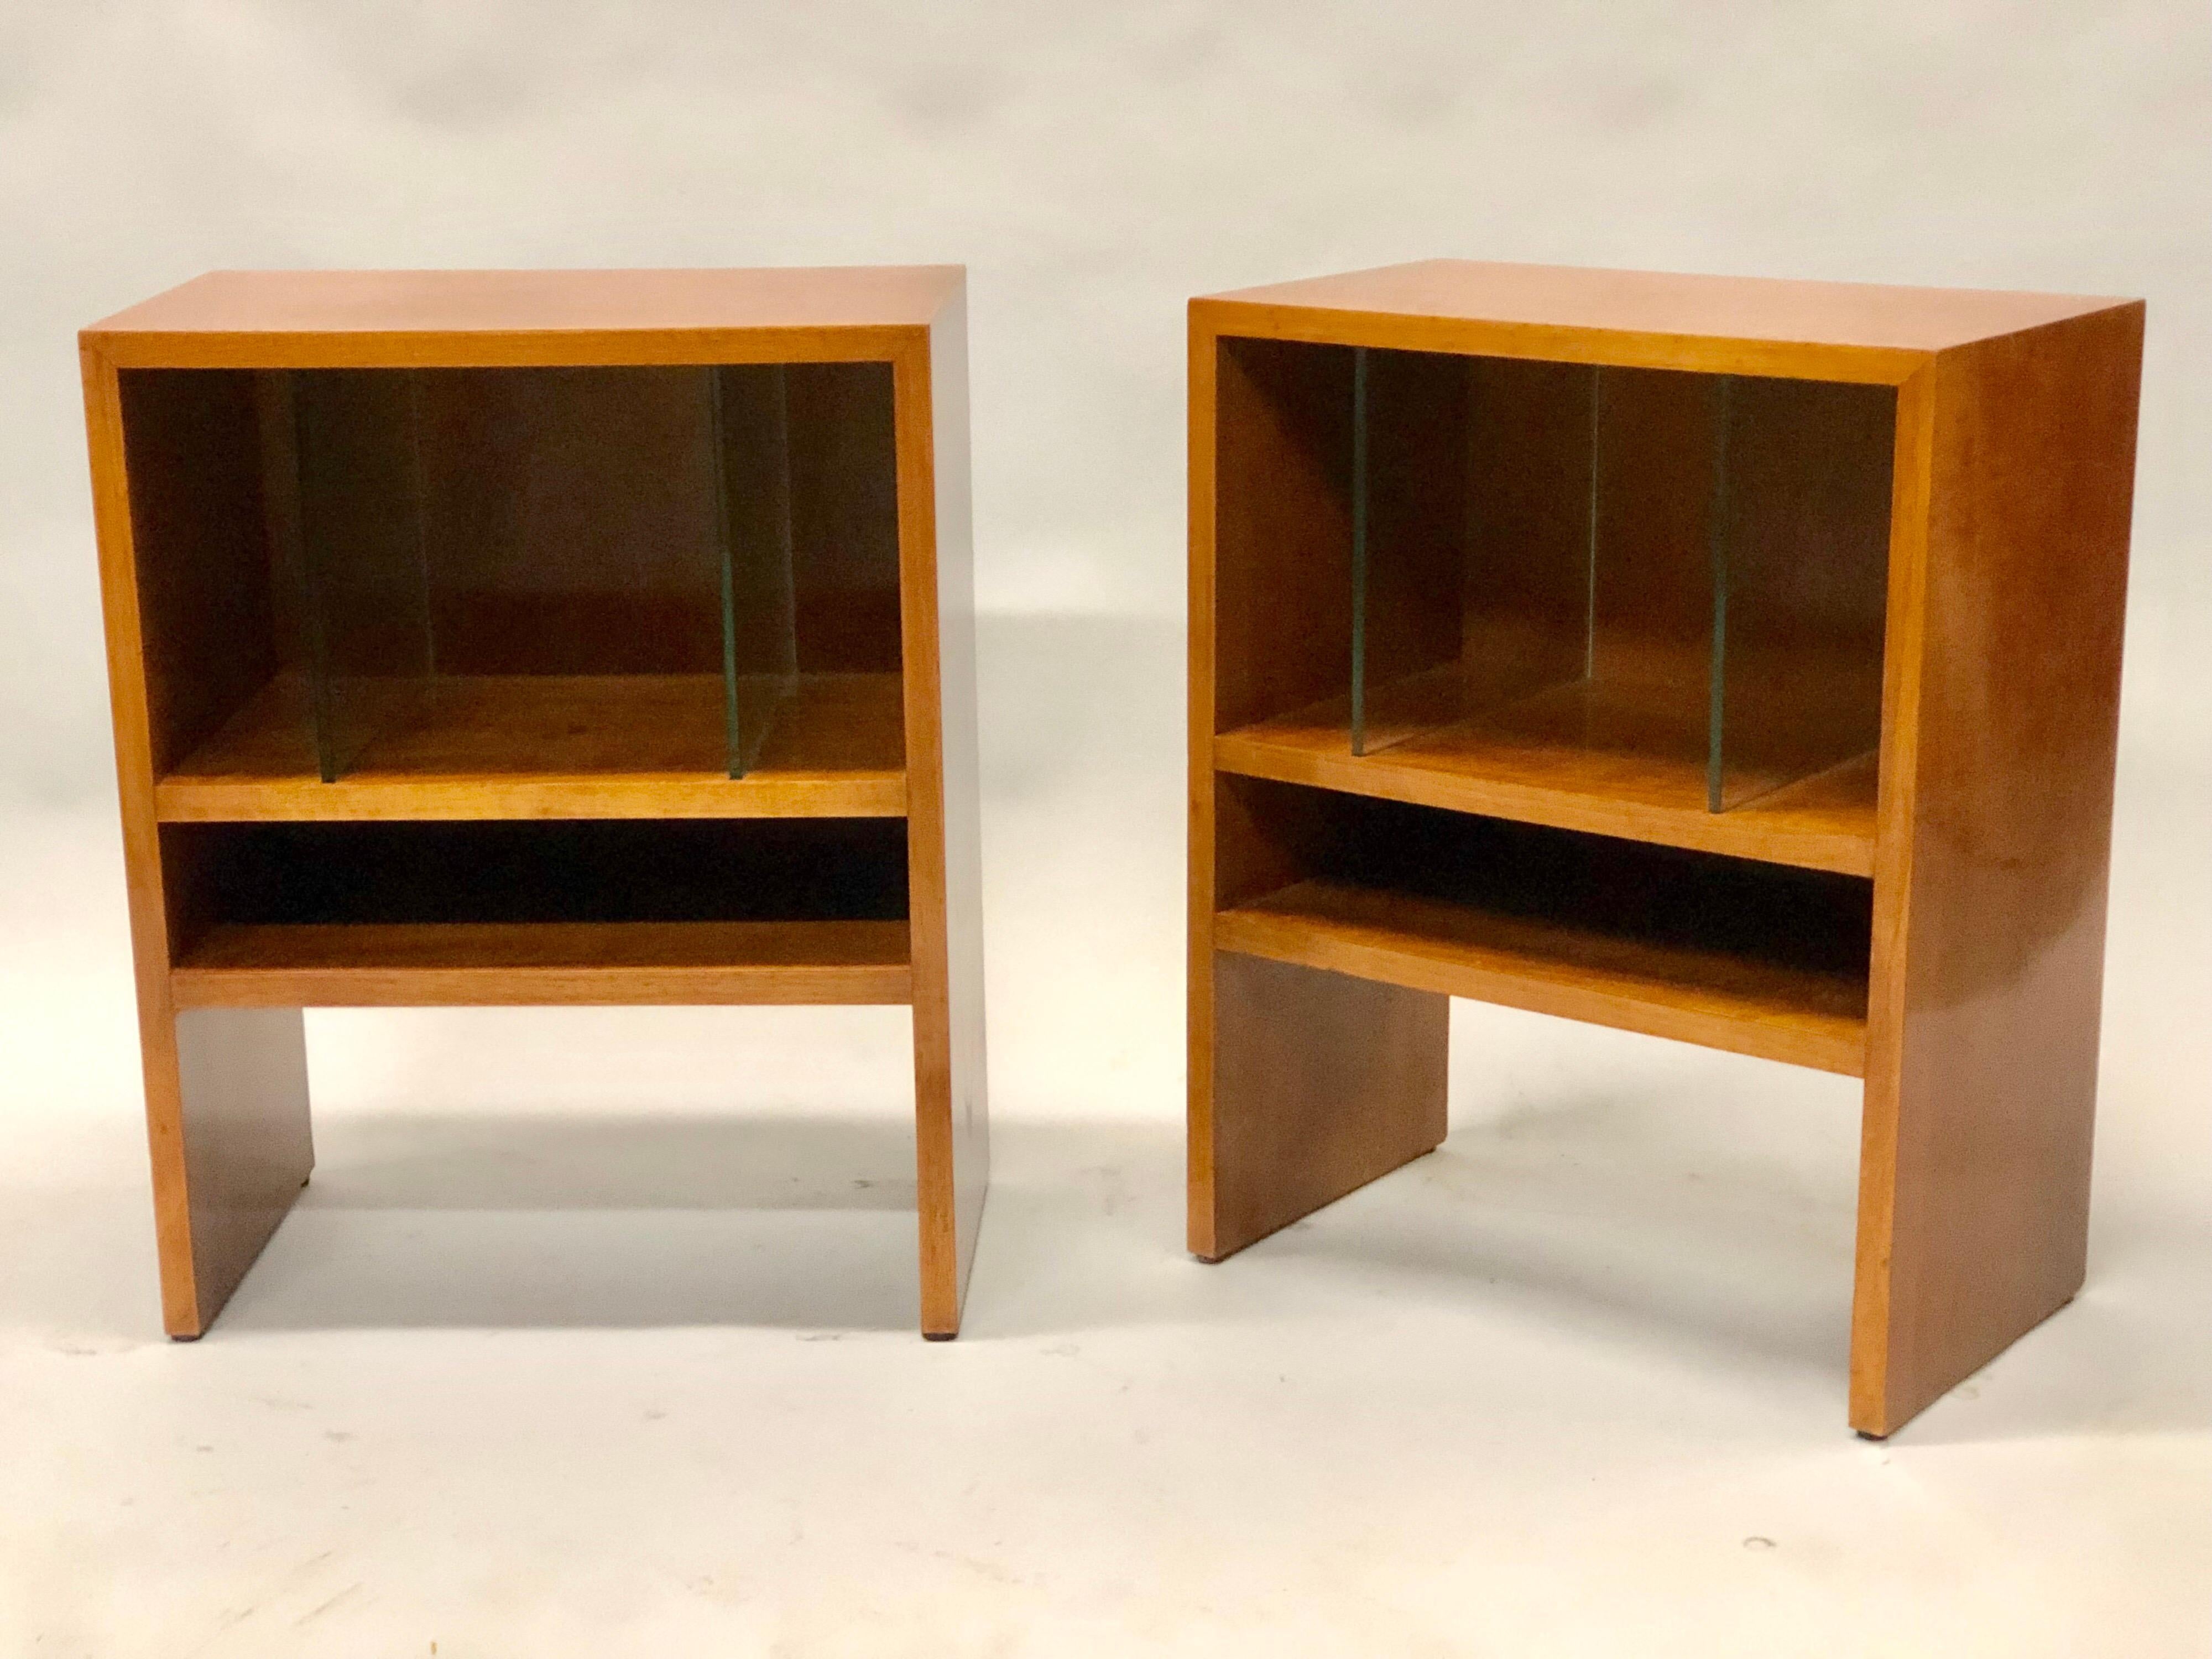 Elegant, sober pair of double level Italian Mid-Century Modern / Rationalist School nightstands, end or side tables / nightstands in solid wood with 2 thick glass partitions on the upper level. The pieces resemble small rational inspired buildings